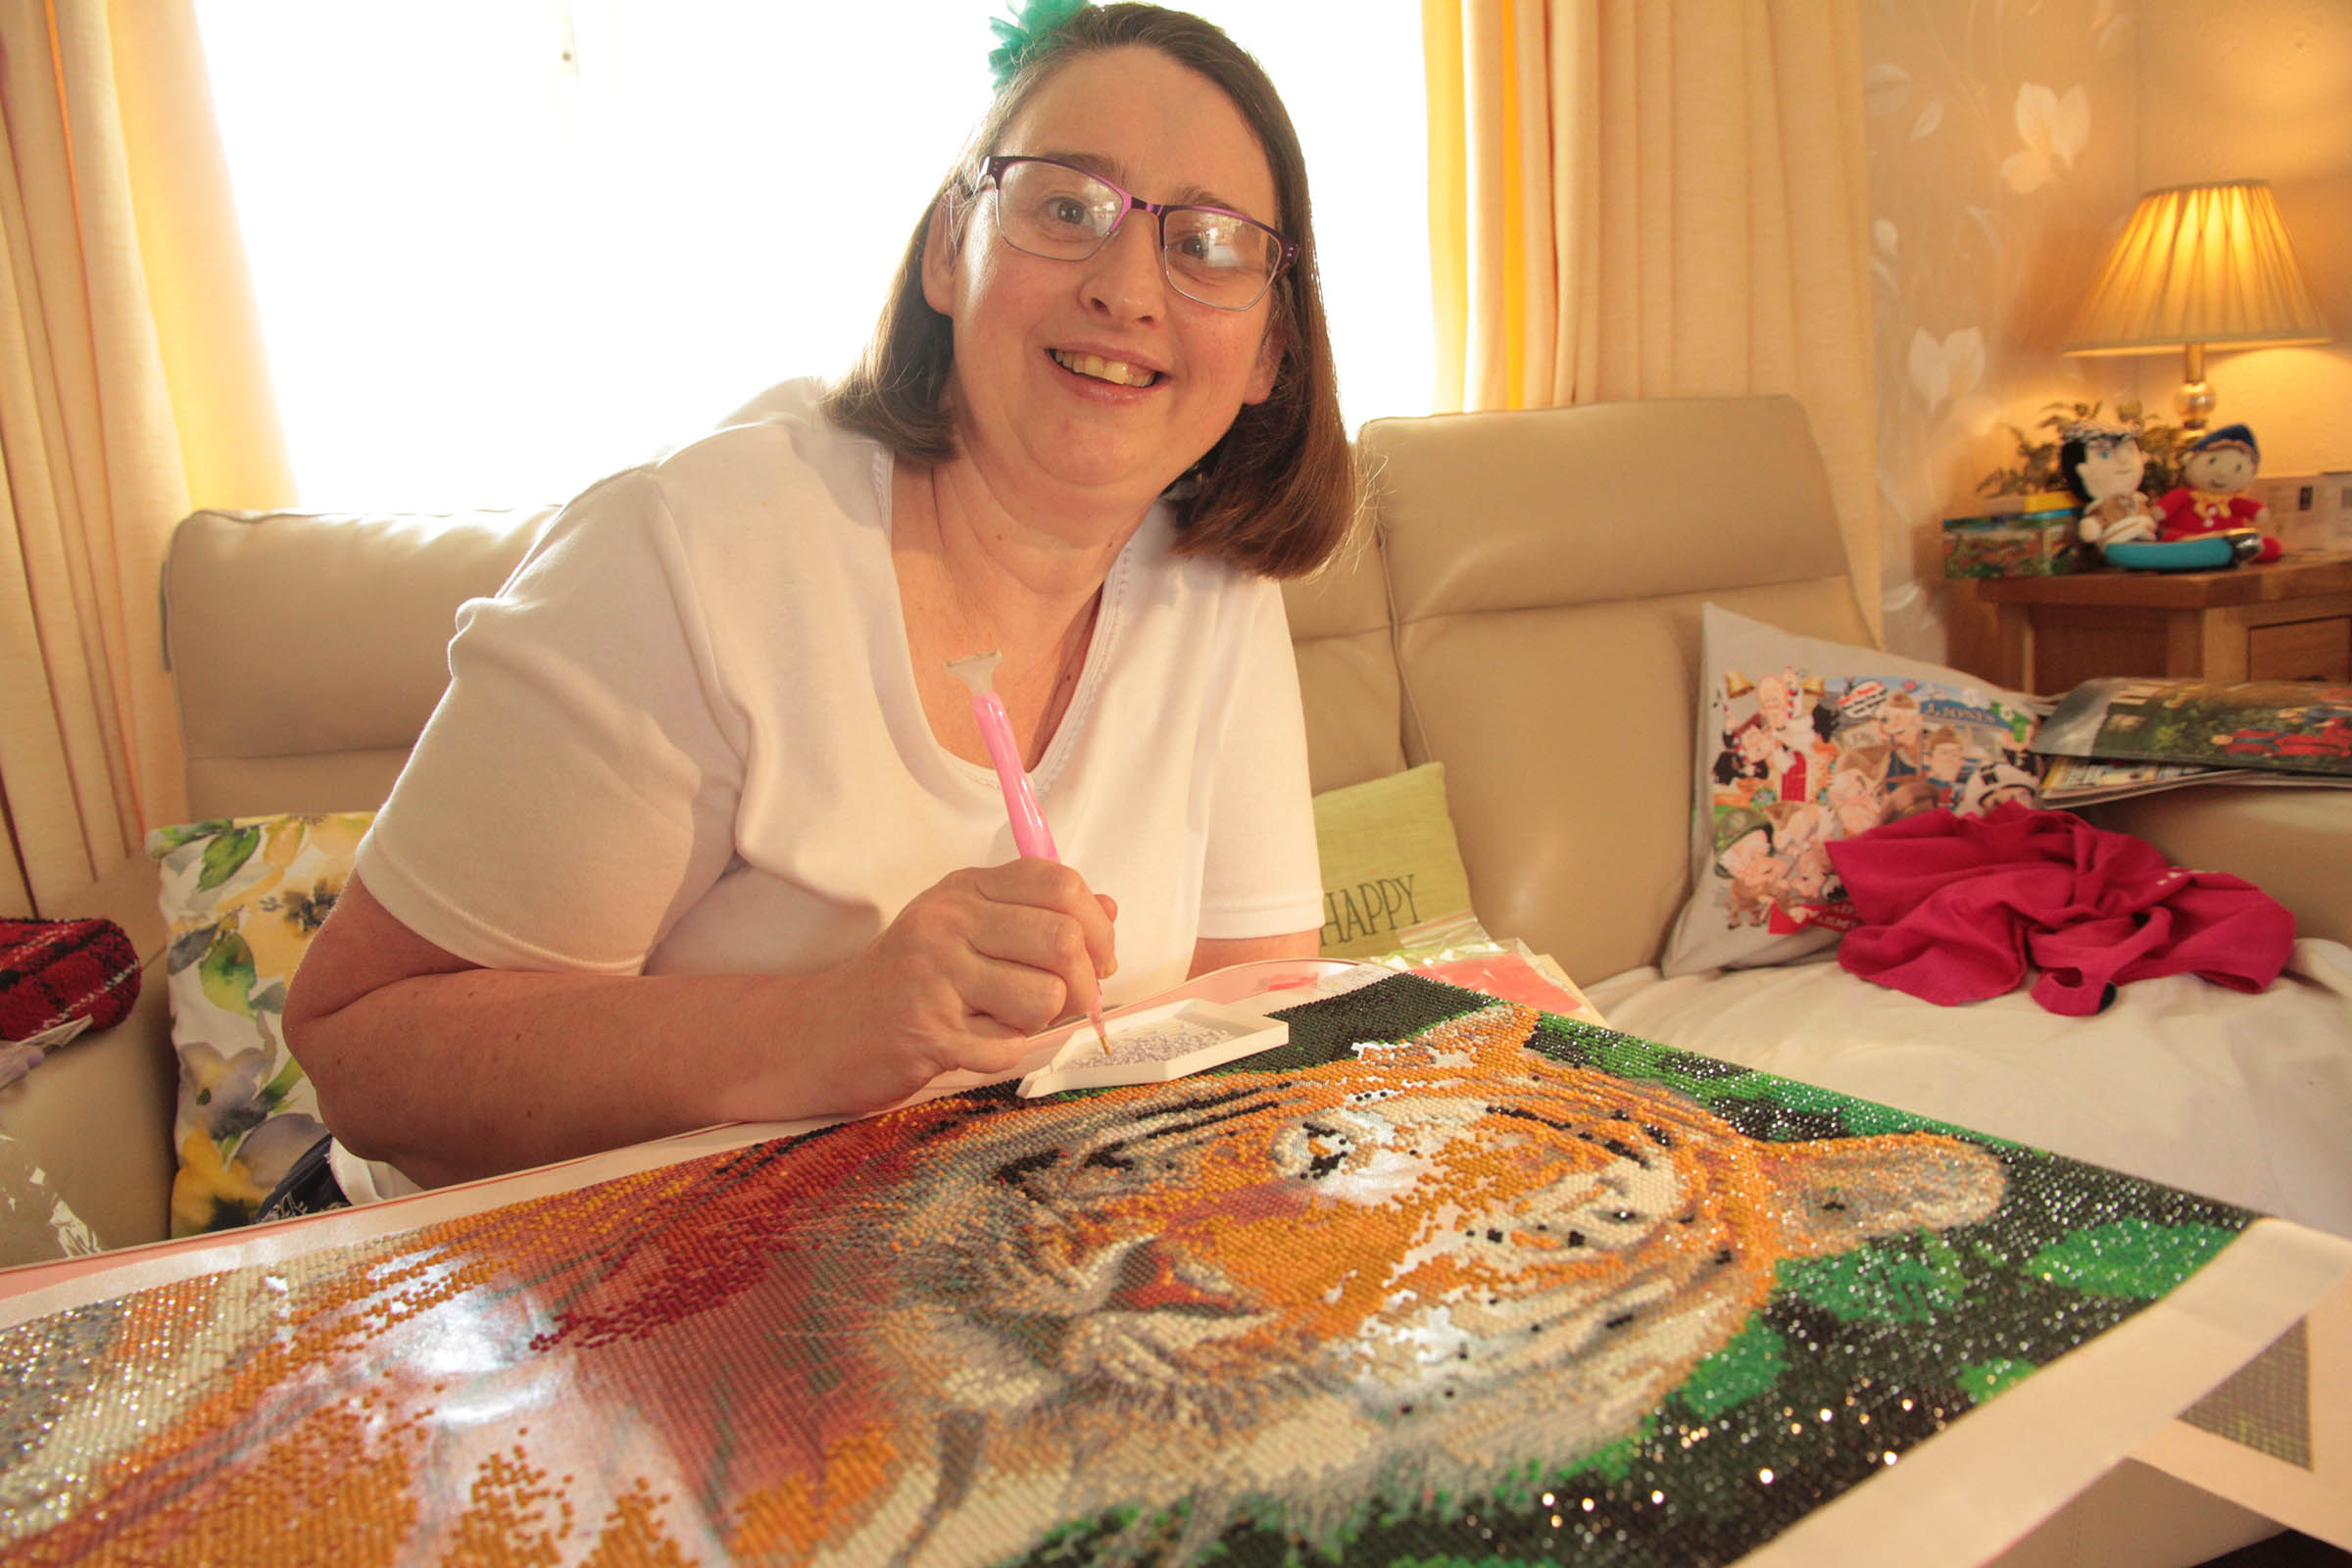 Wendy doing her diamond art, she is creating a Tiger.